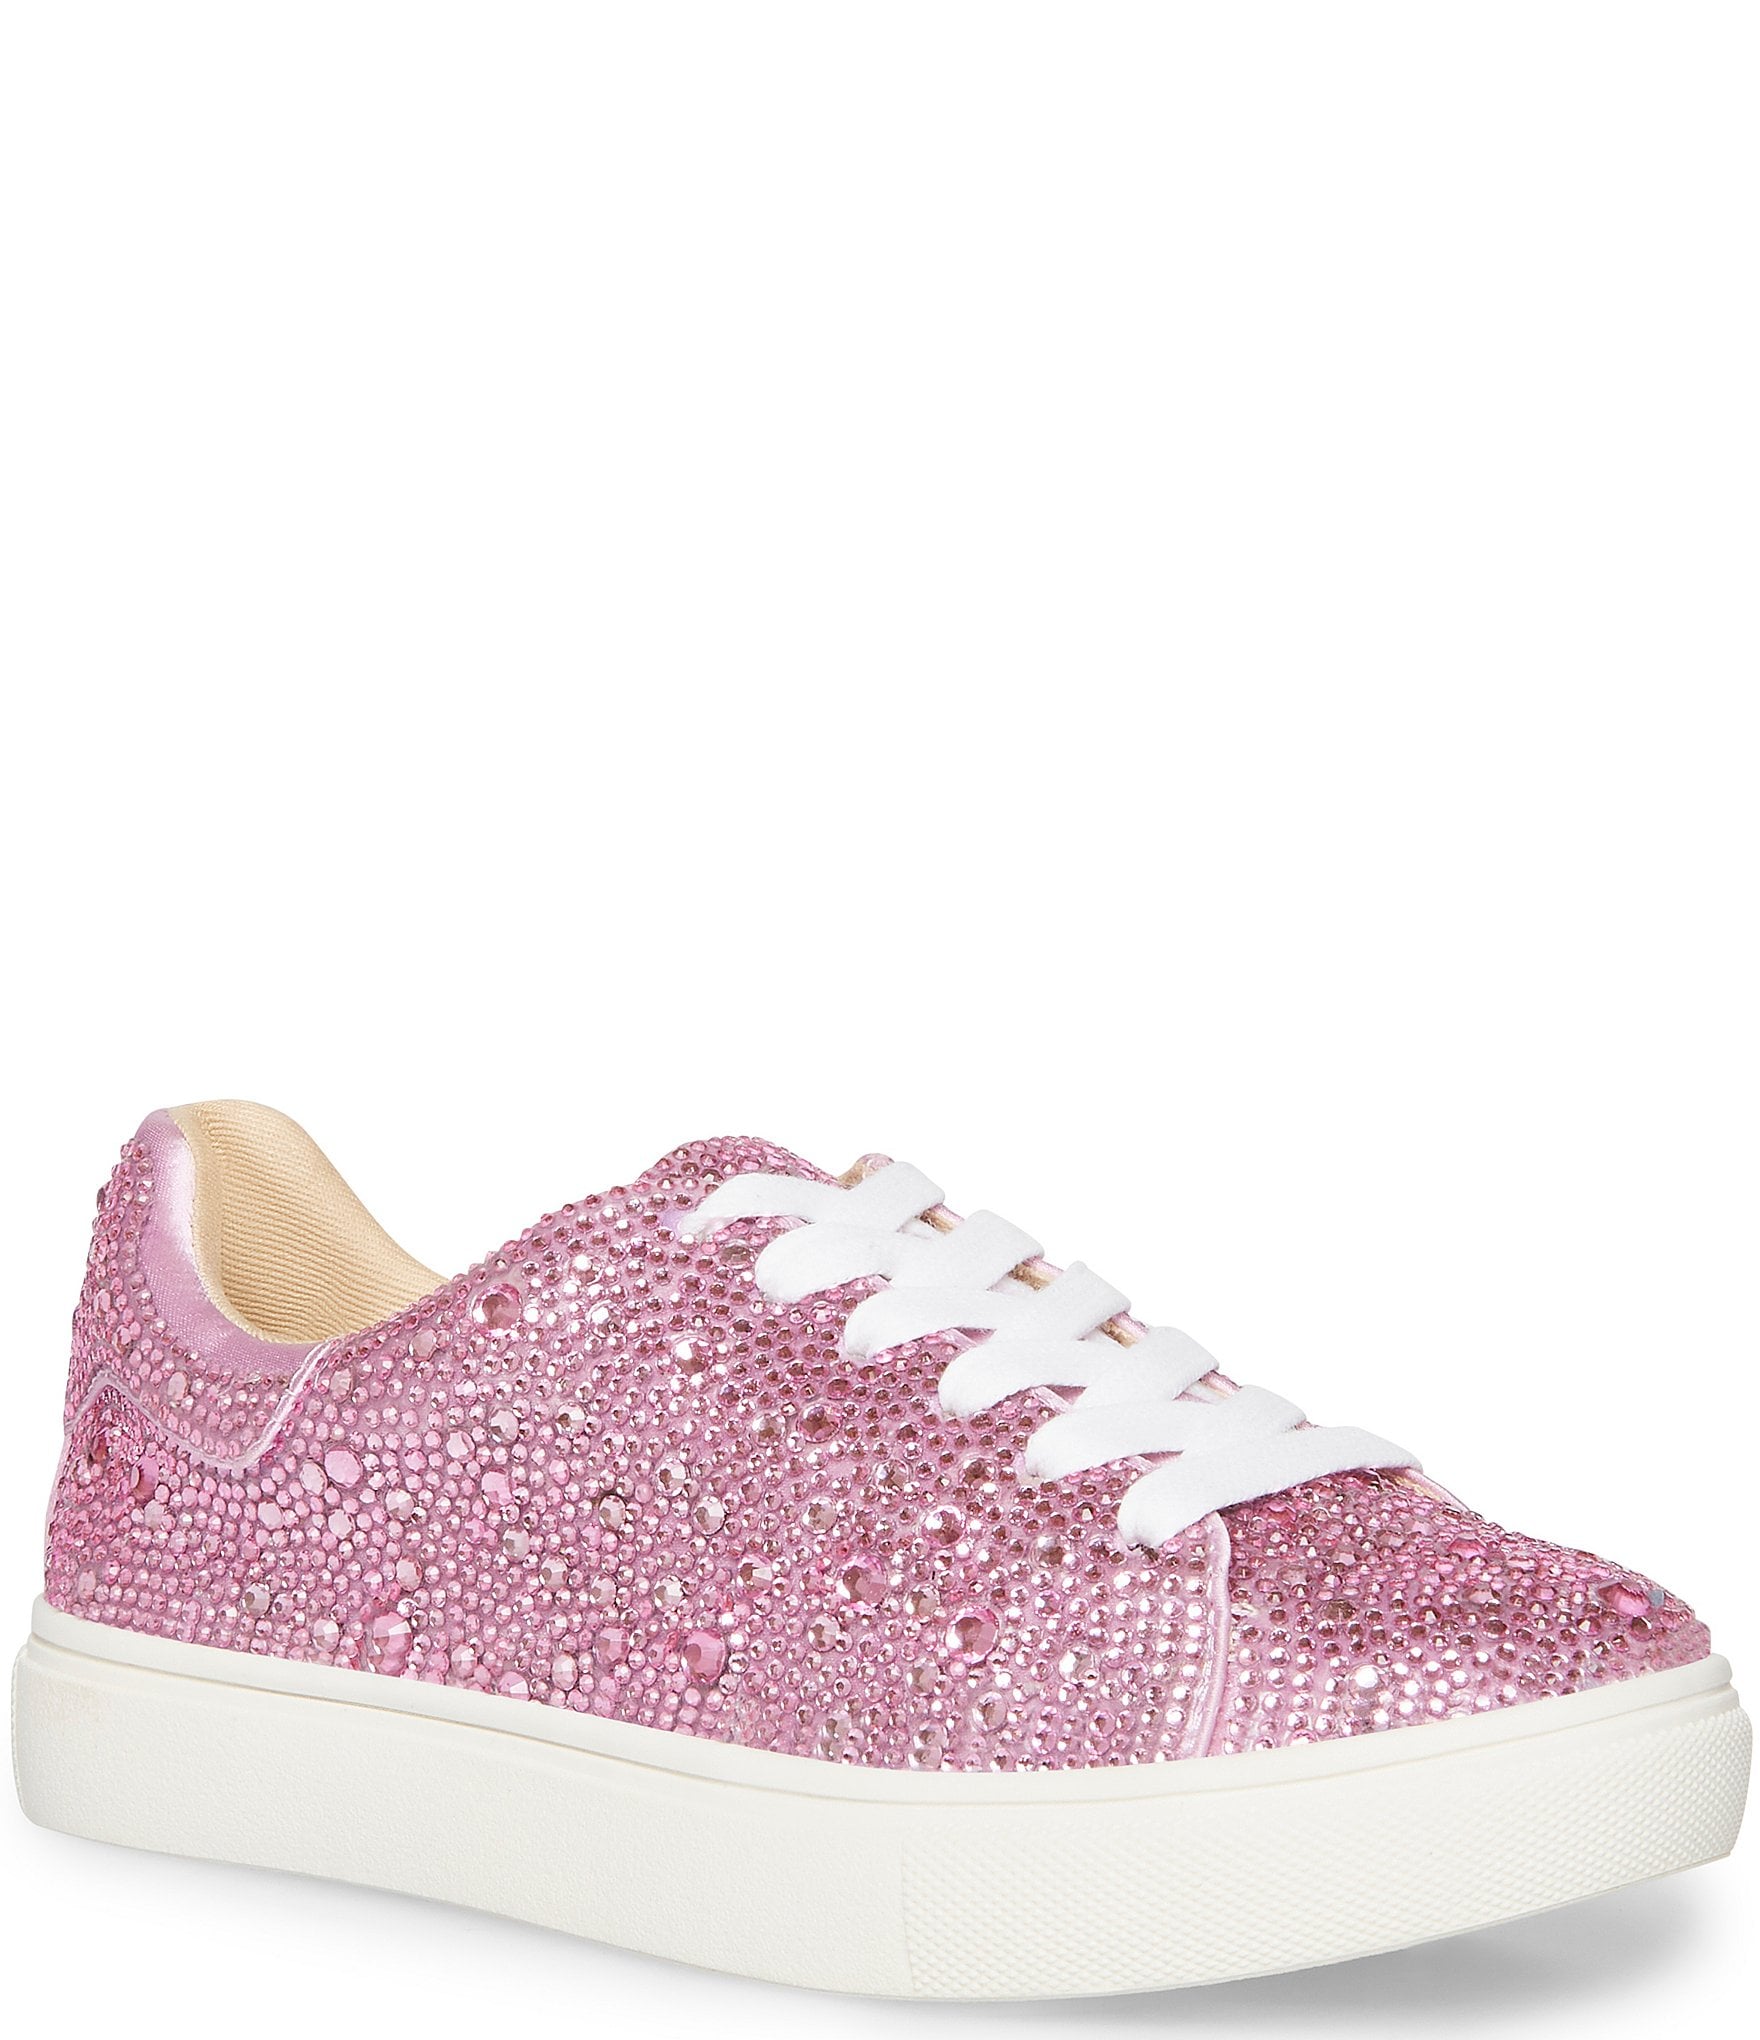 maling Råd Indtil Betsey Johnson Girls' Sidny Rhinestone Embellished Lace-Up Sneakers (Youth)  | Dillard's